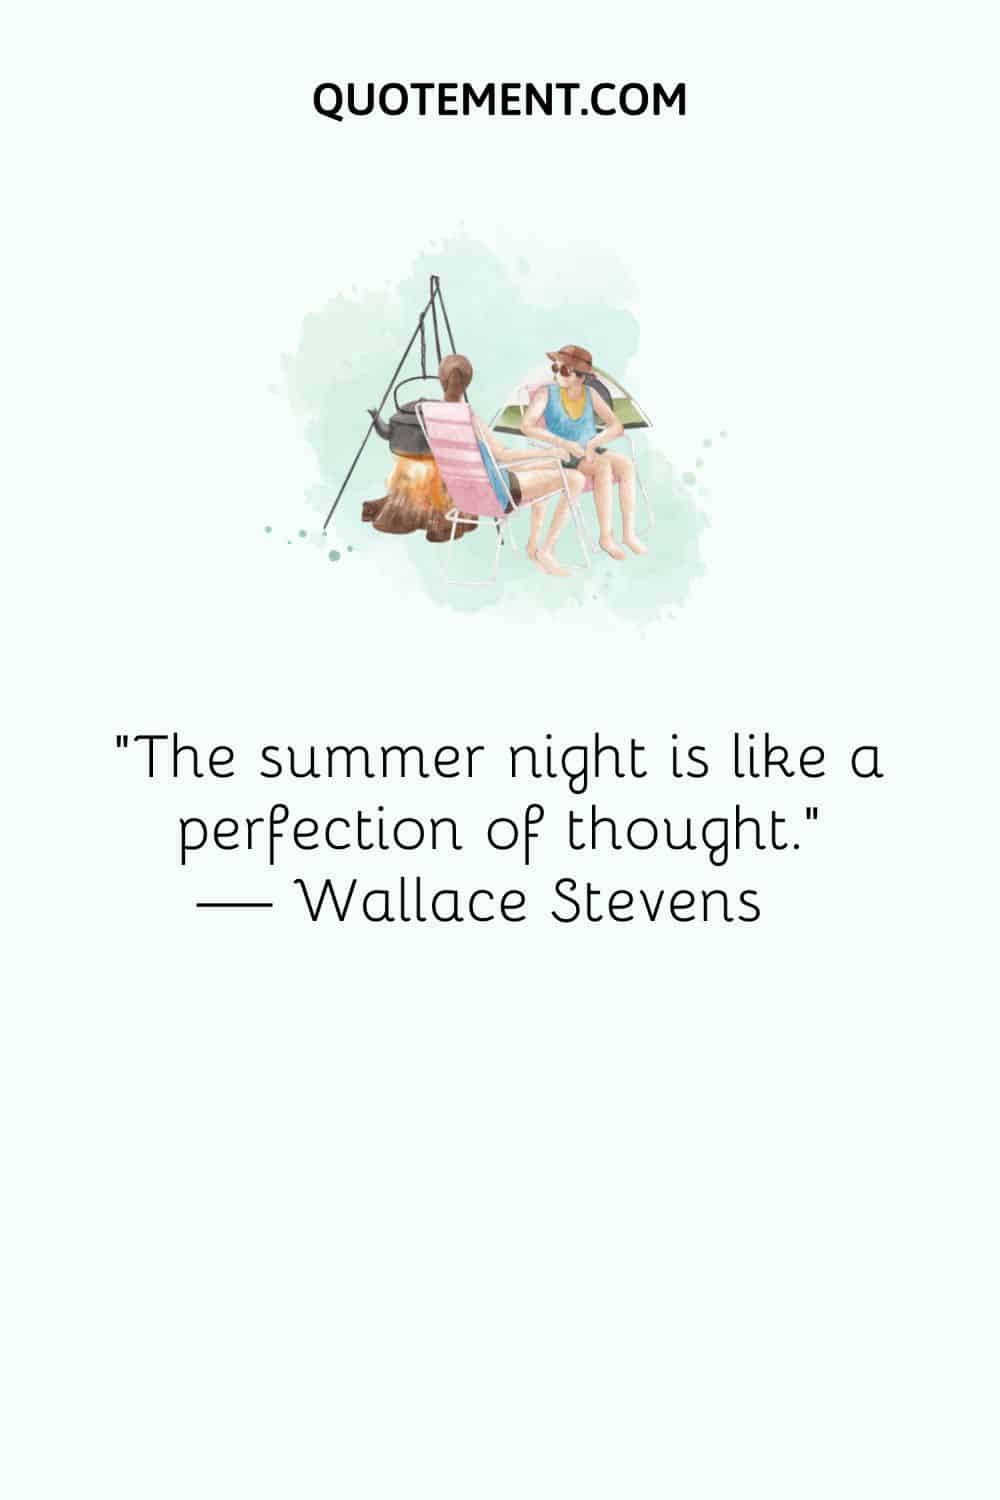 “The summer night is like a perfection of thought.” — Wallace Stevens